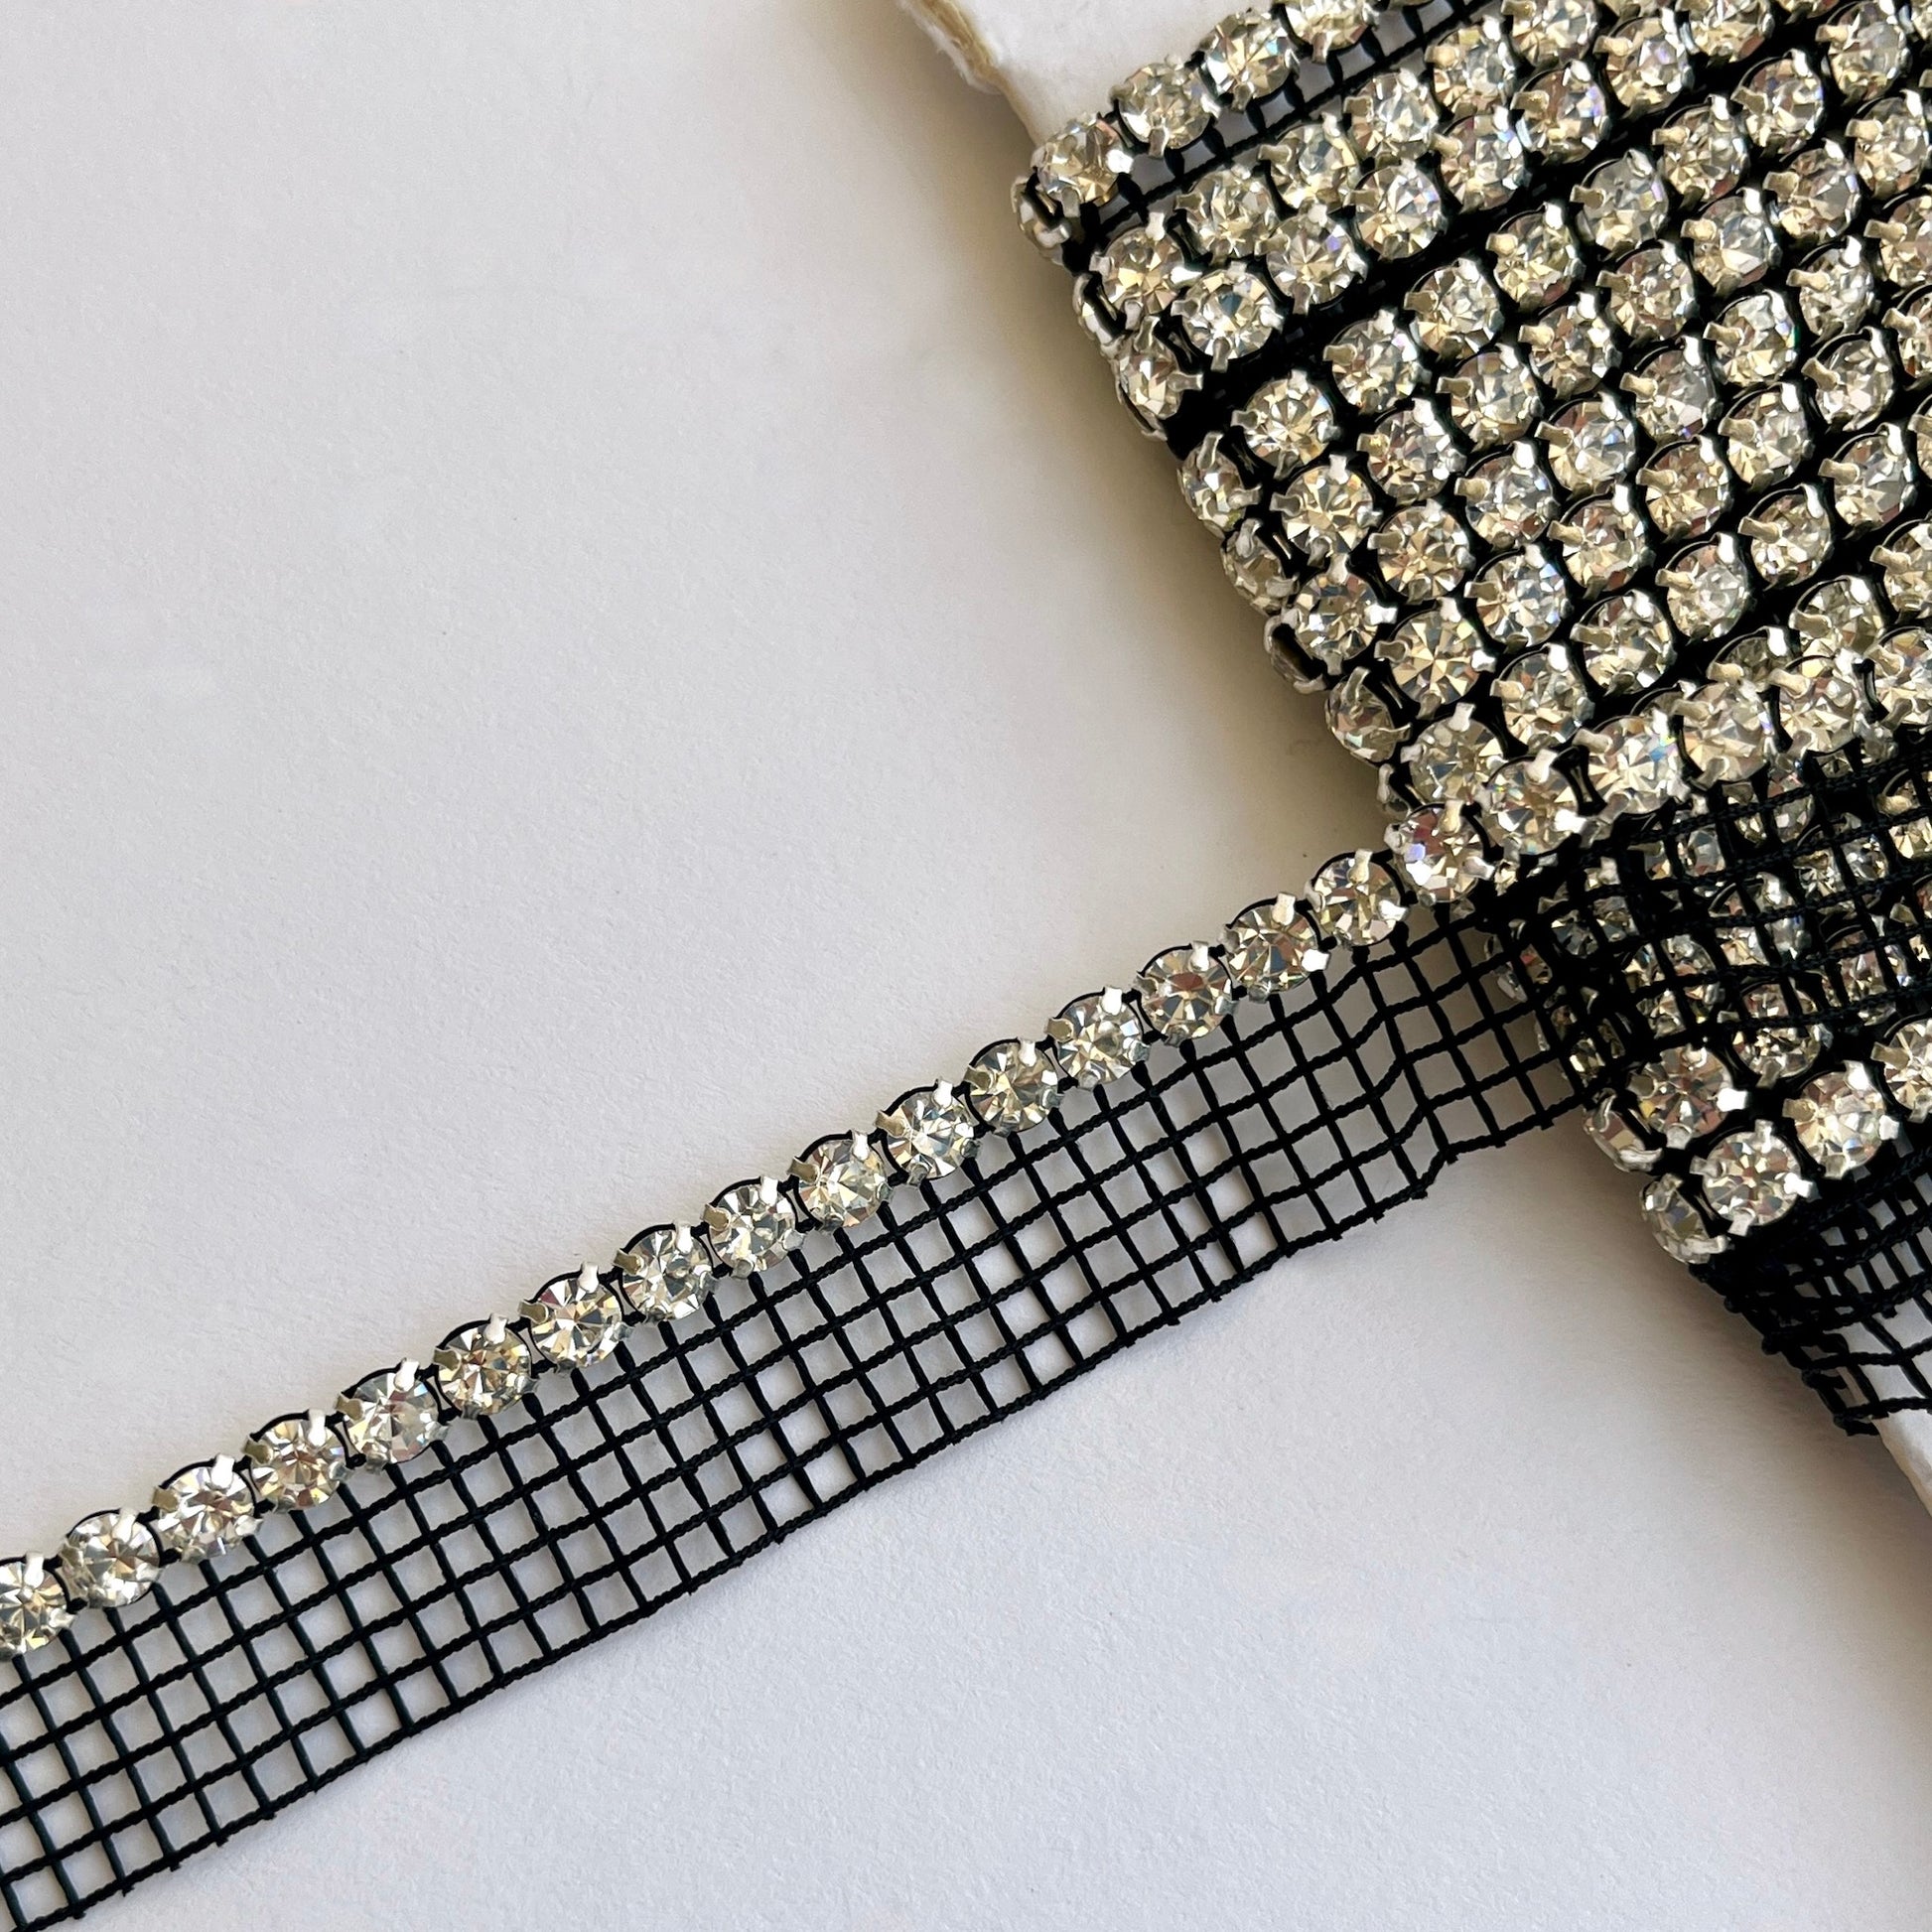 Sparkly rhinestone insertion trim - premium high grade diamanté crystals on a flexible net insertion tape. Please note - we have very limited stock of the white colour way.  Black/clear crystal: Sold by the metre  White/clear crystal: LIMITED STOCK - 80cm length only